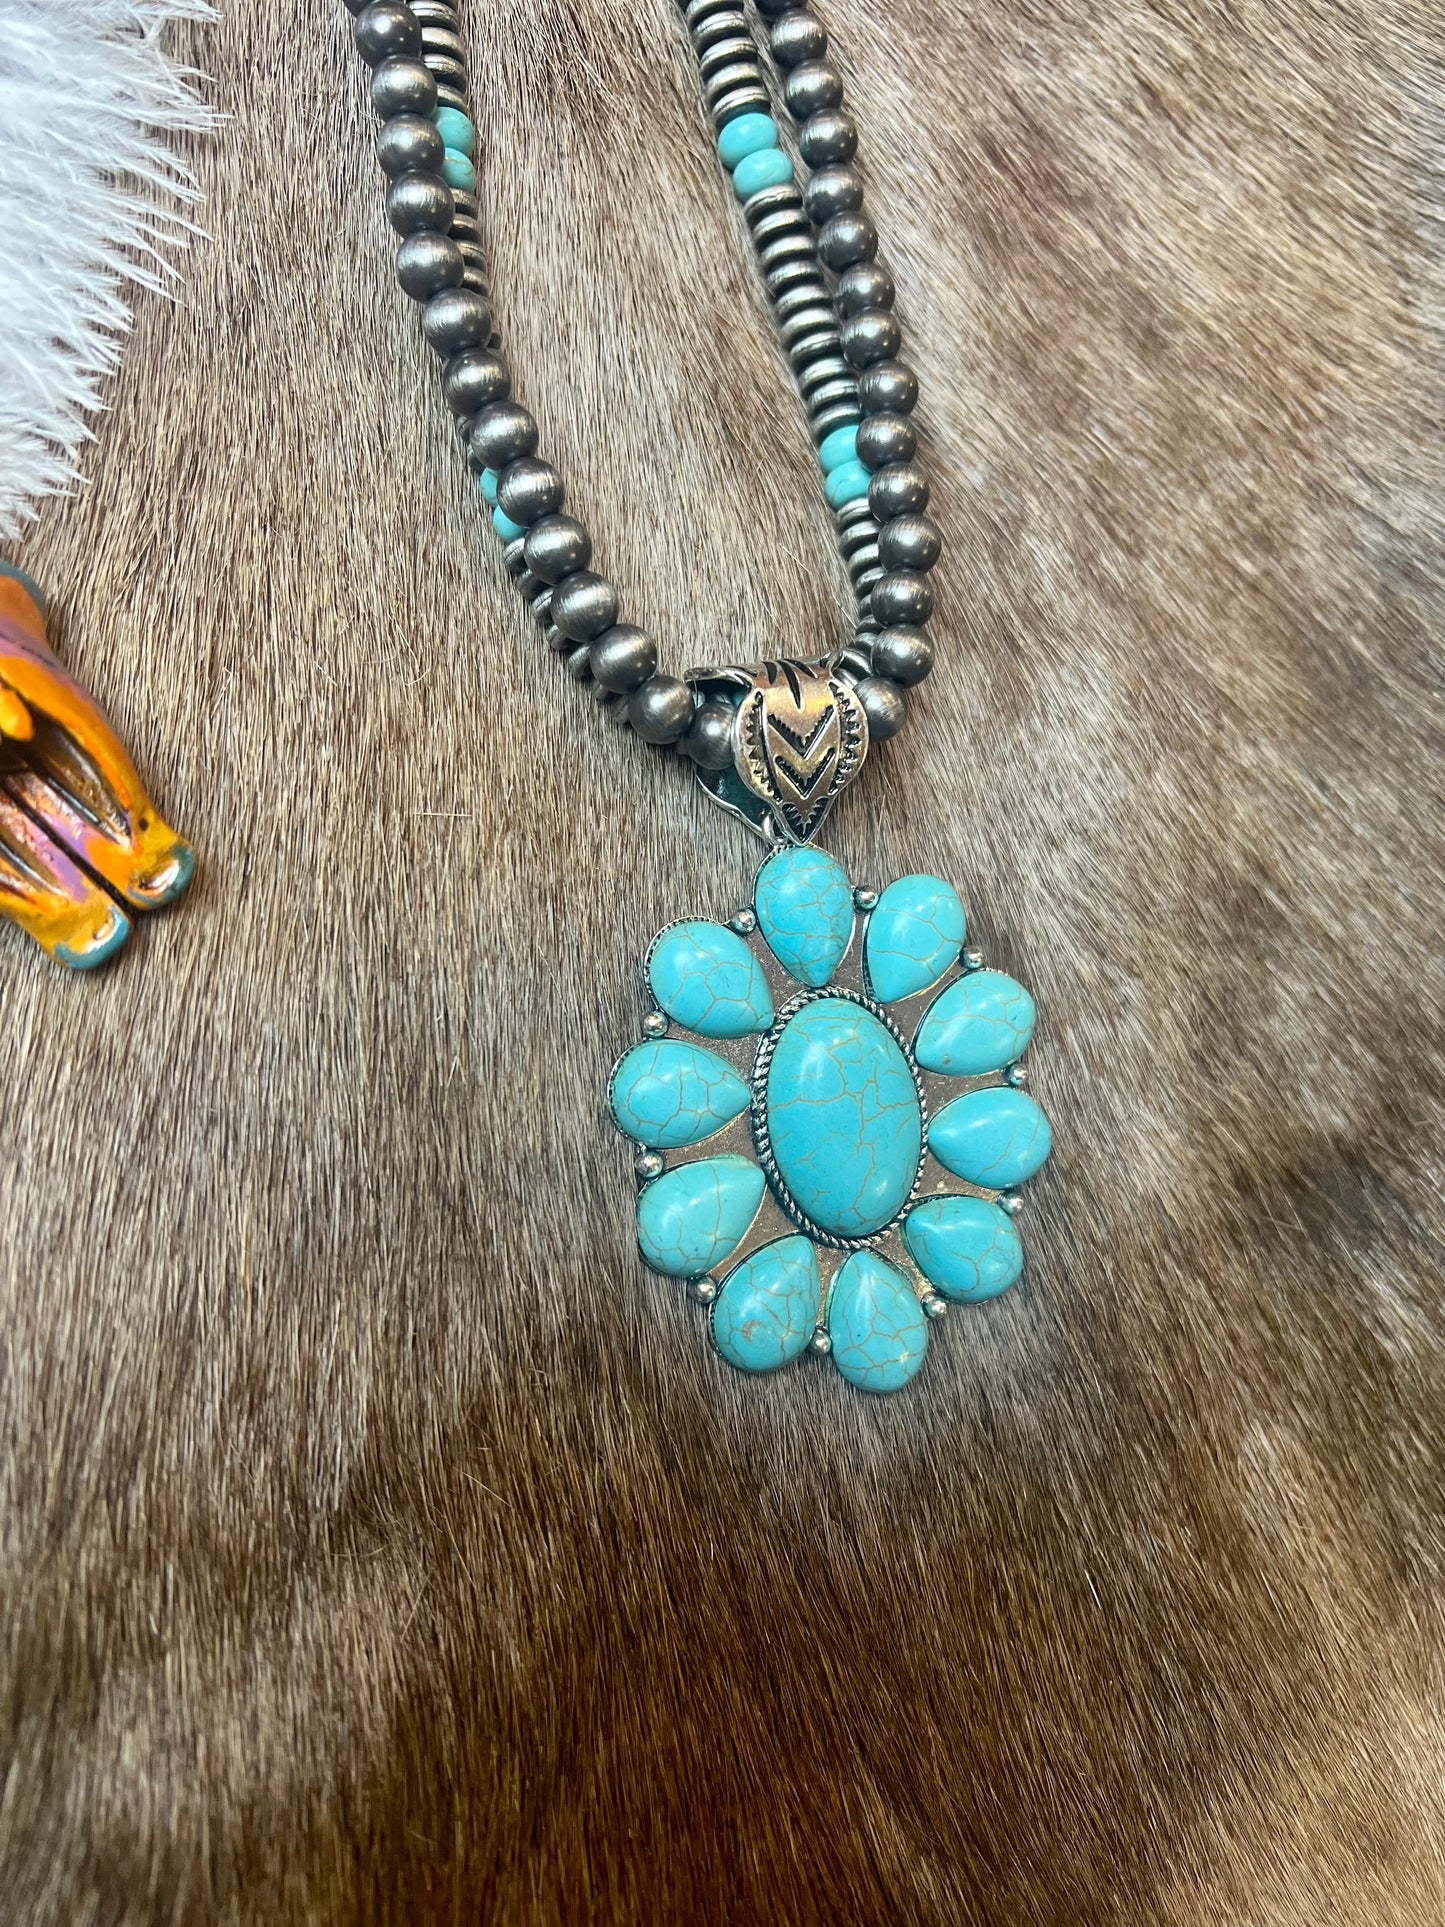 Ranch Wifey Turquoise Squash Blossom Pendant Pearls Necklace